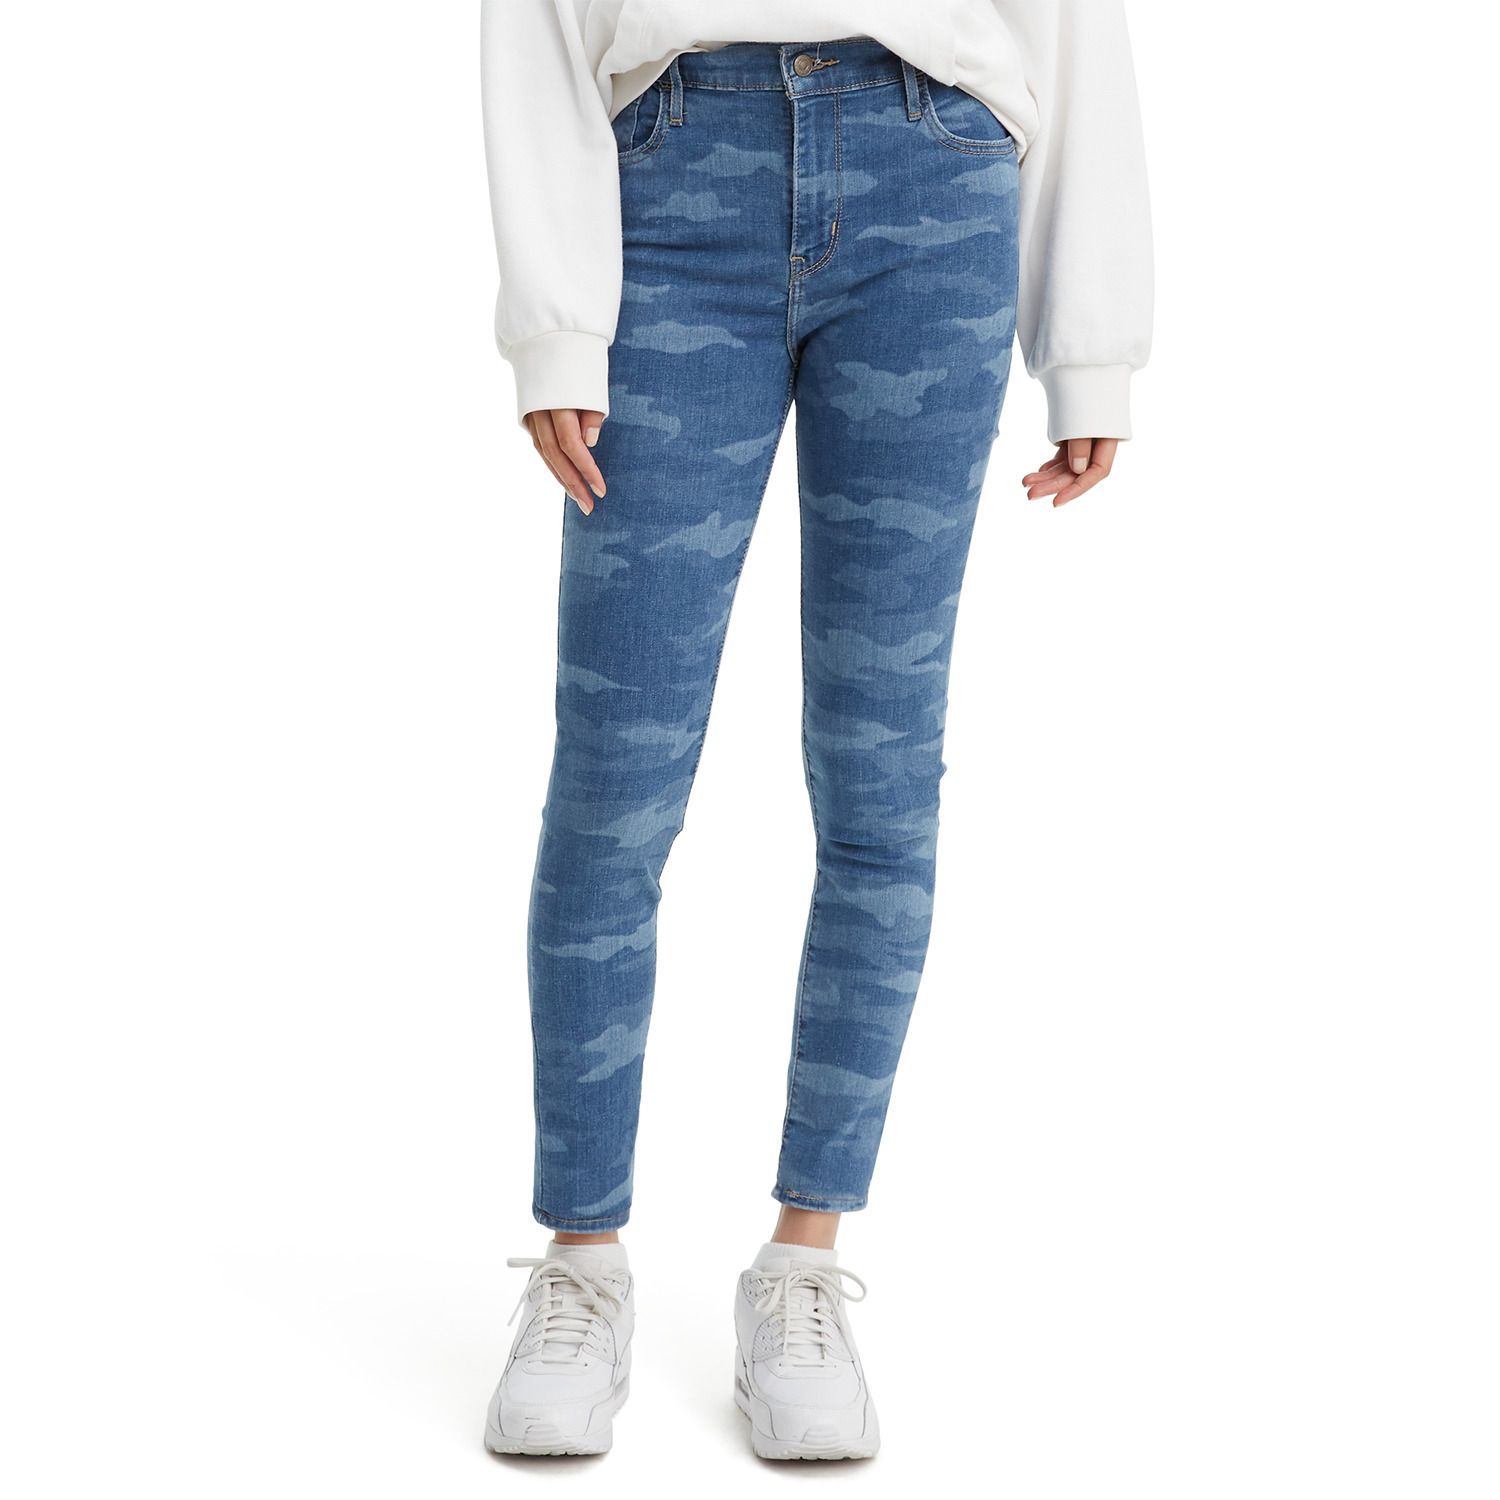 levi's 720 high rise jeans